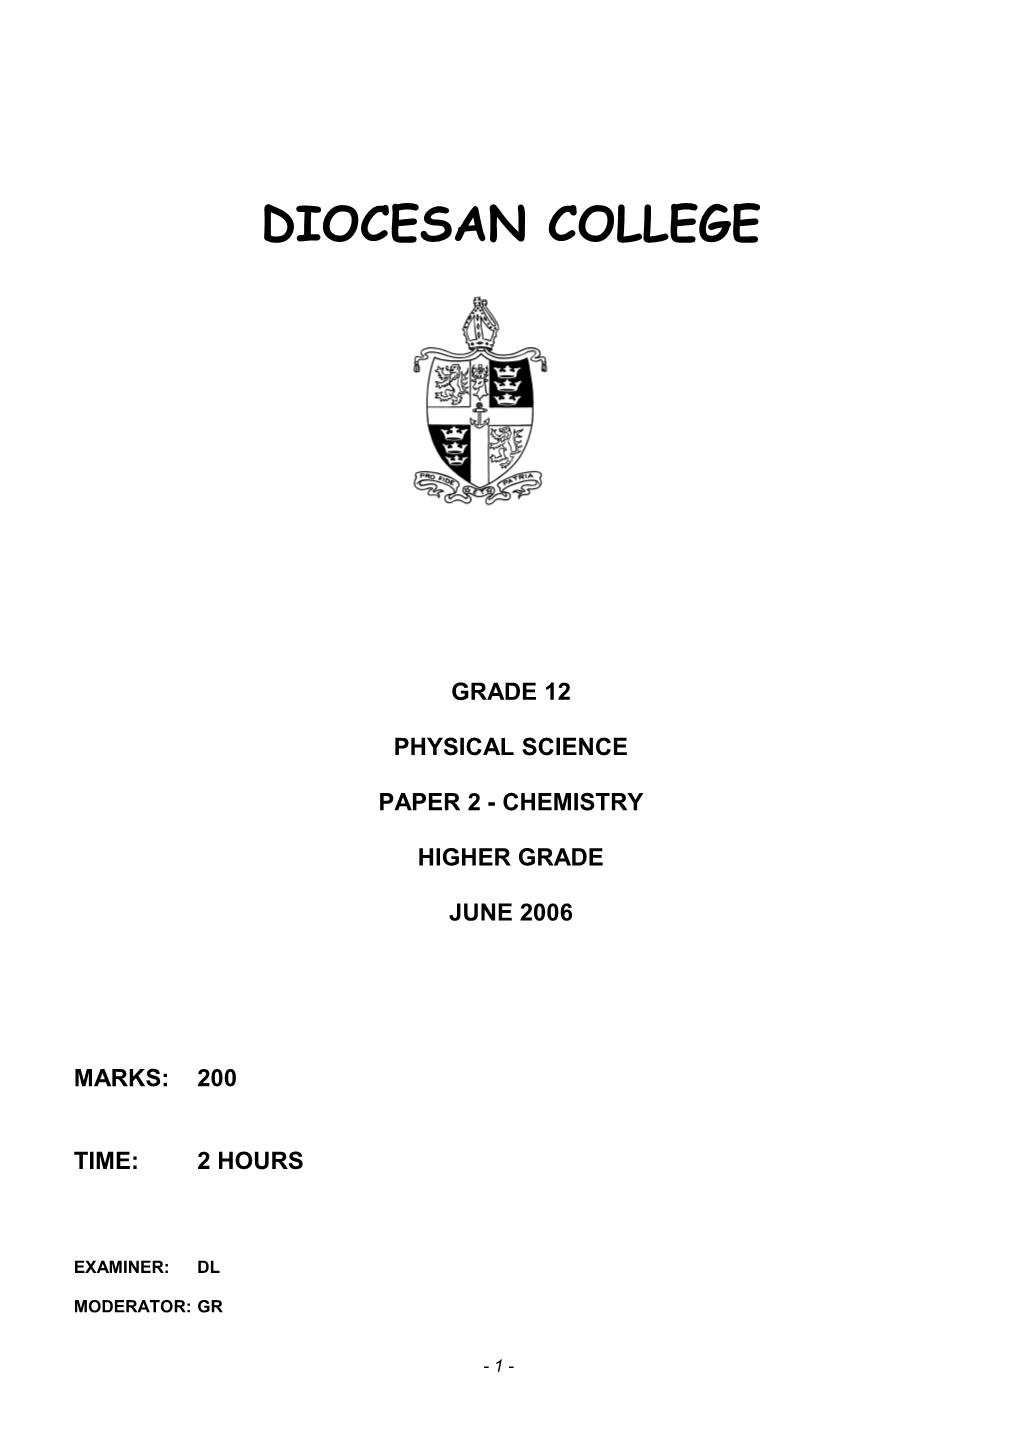 Plan of the Grade 12 Chemistry Paper